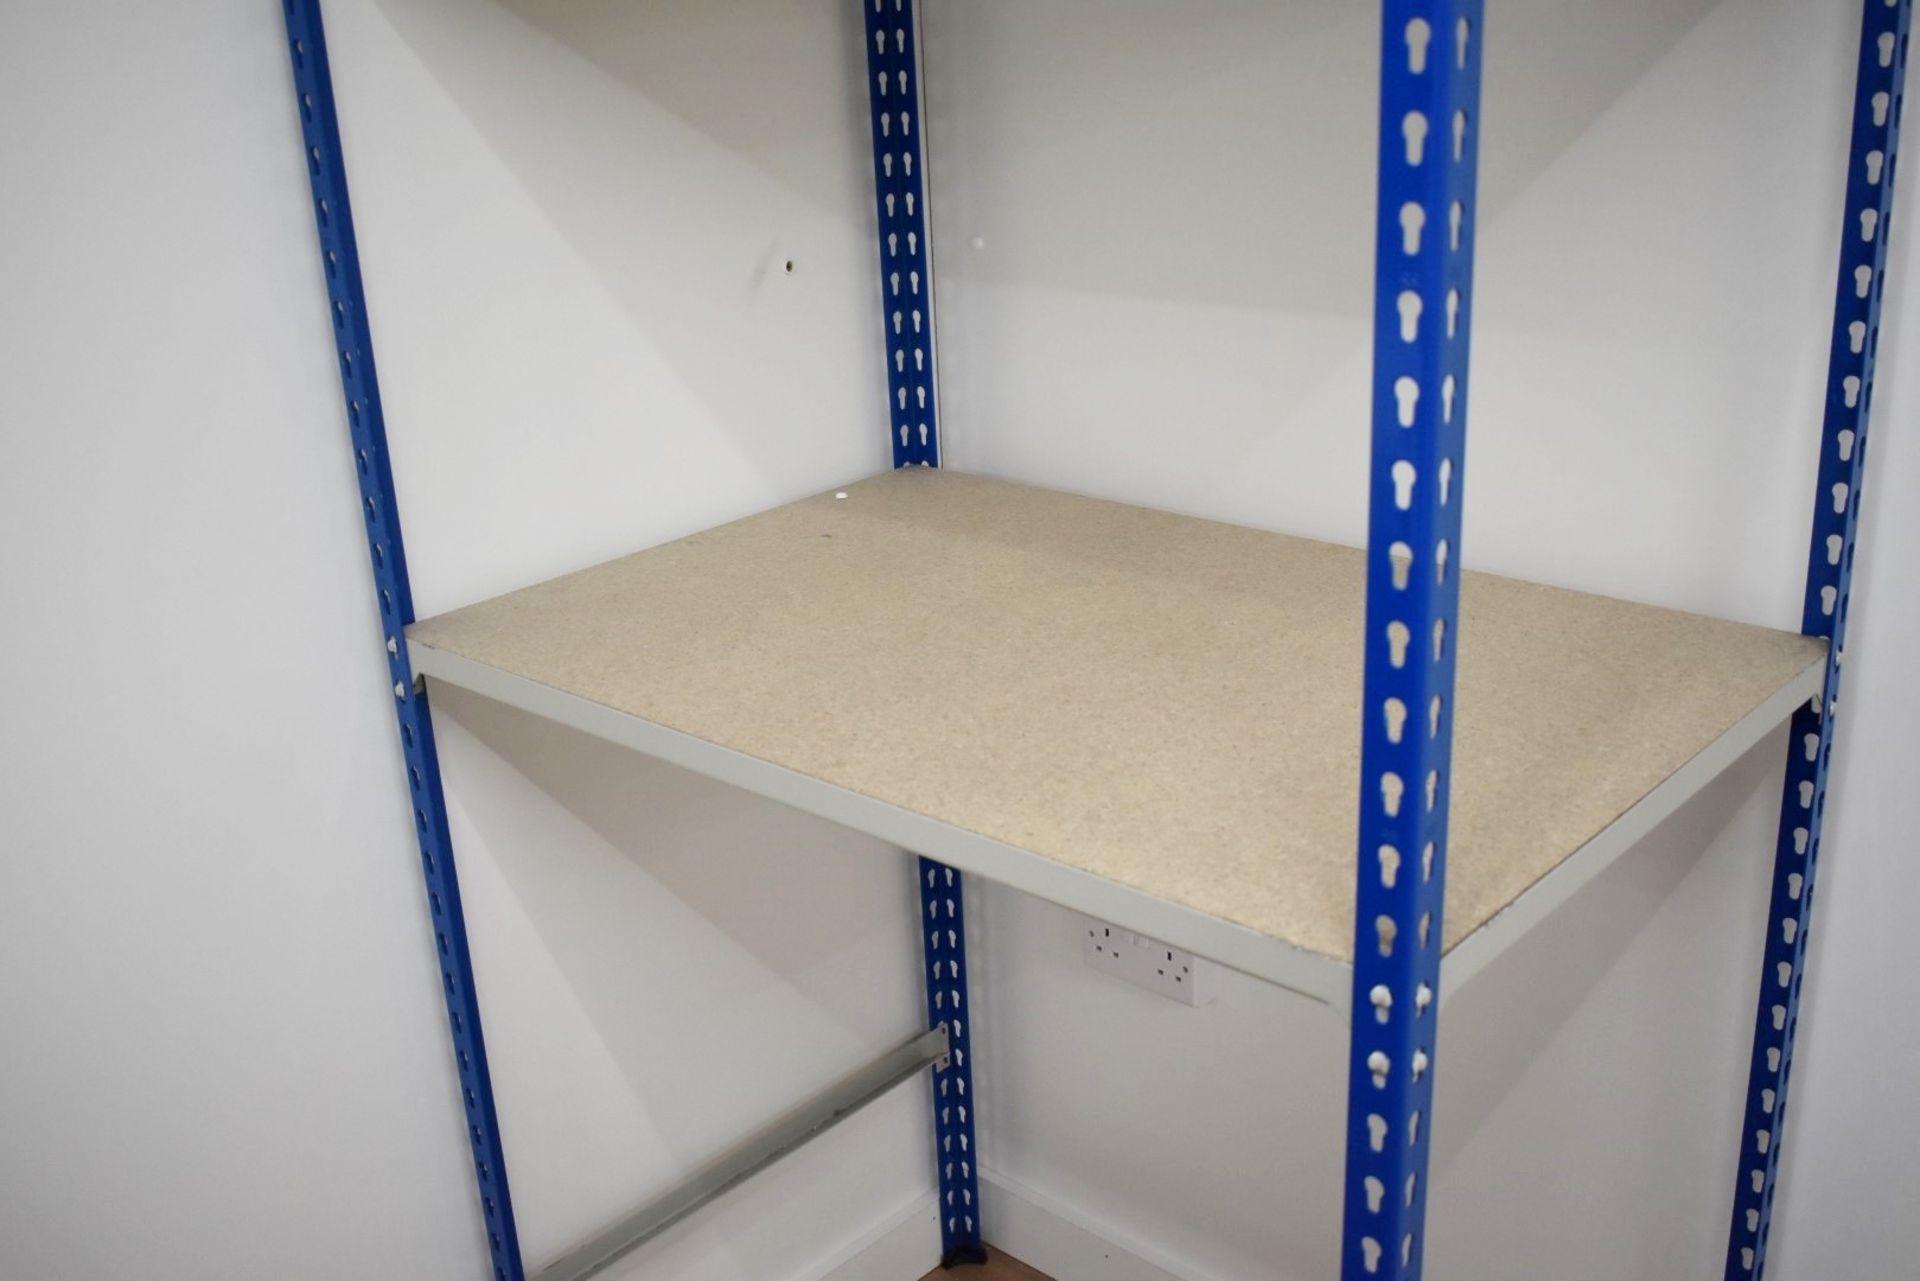 1 x Boltless Warehouse Storage Shelf With Two Shelves - Image 2 of 2